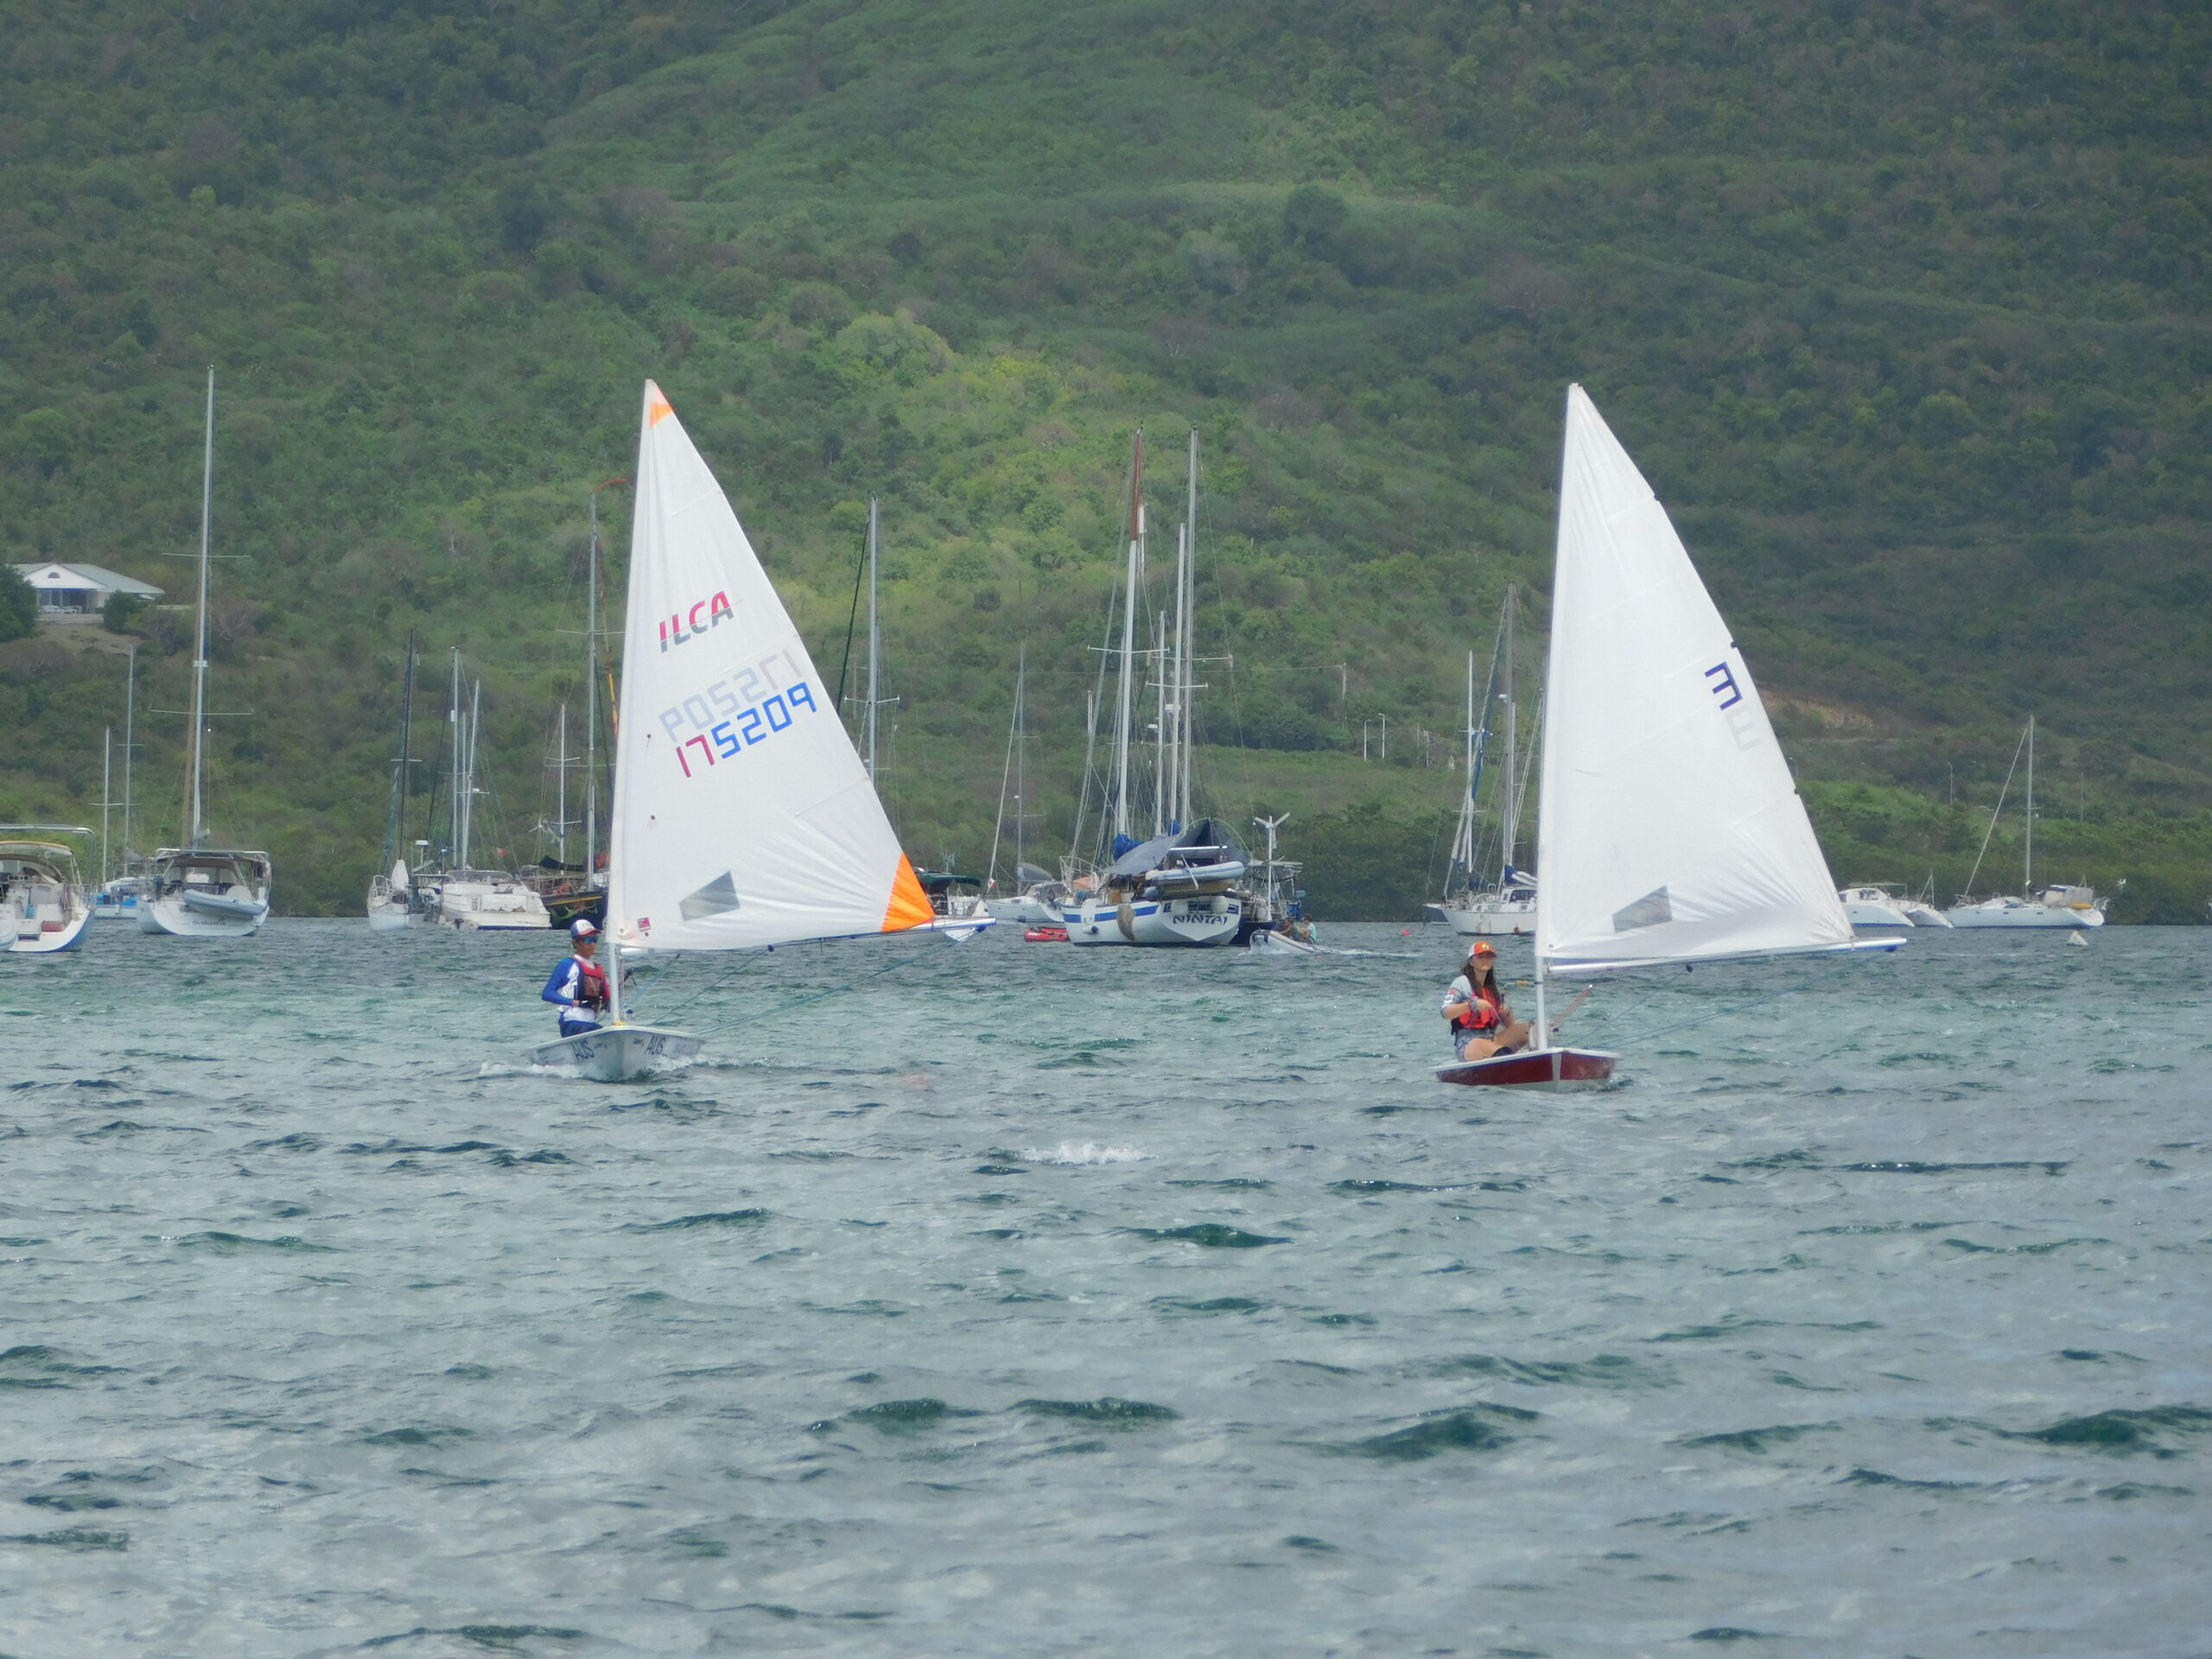 Day 1 of the Hope Ross Series sailed in beautiful conditions.